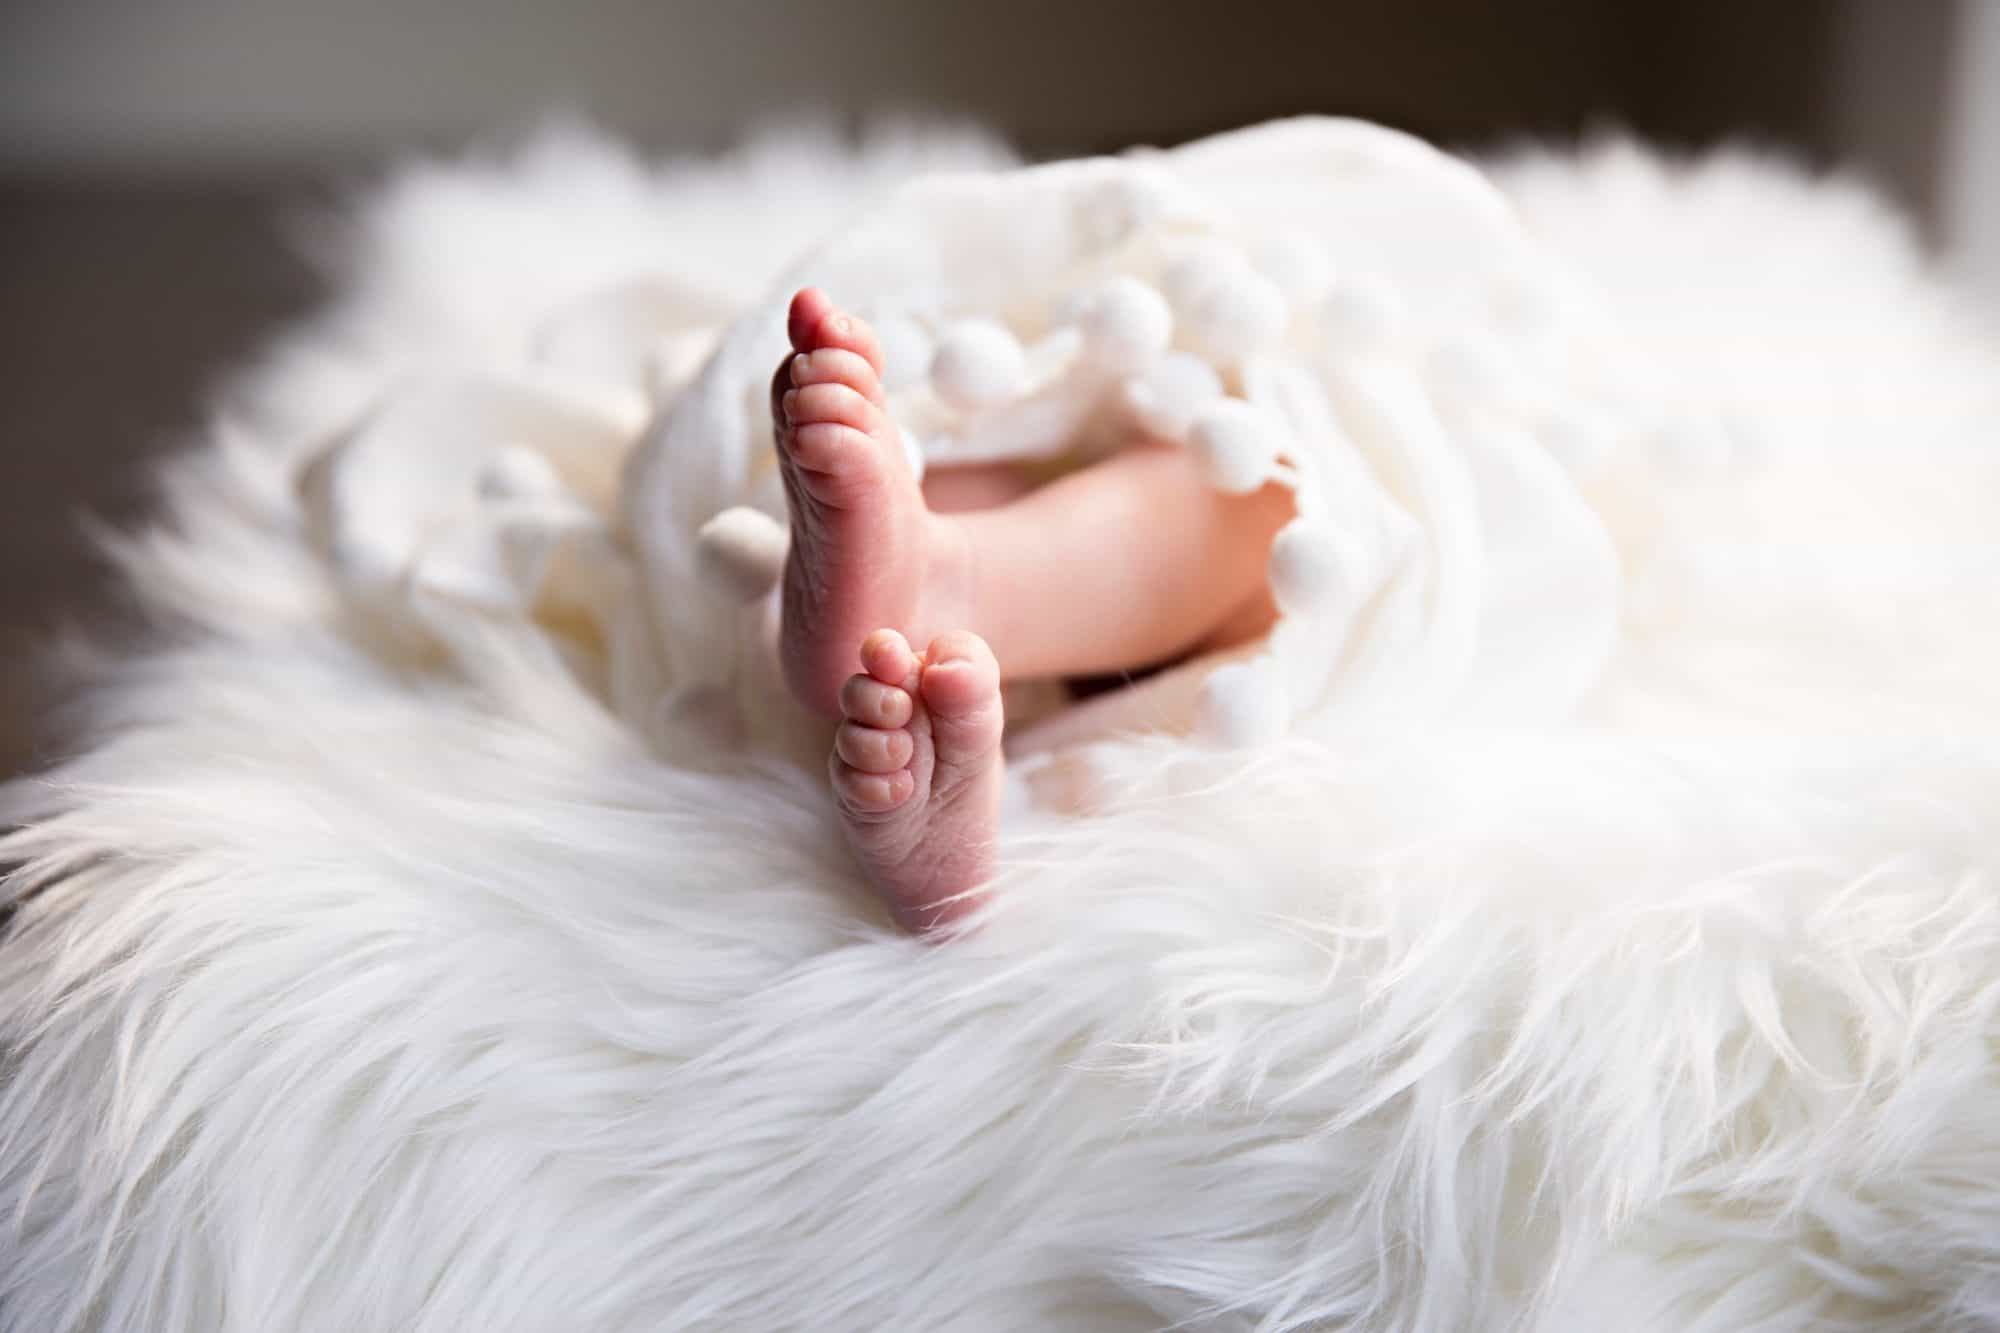 Tiny cute new-born baby feet sticking out of a fluffy rug.